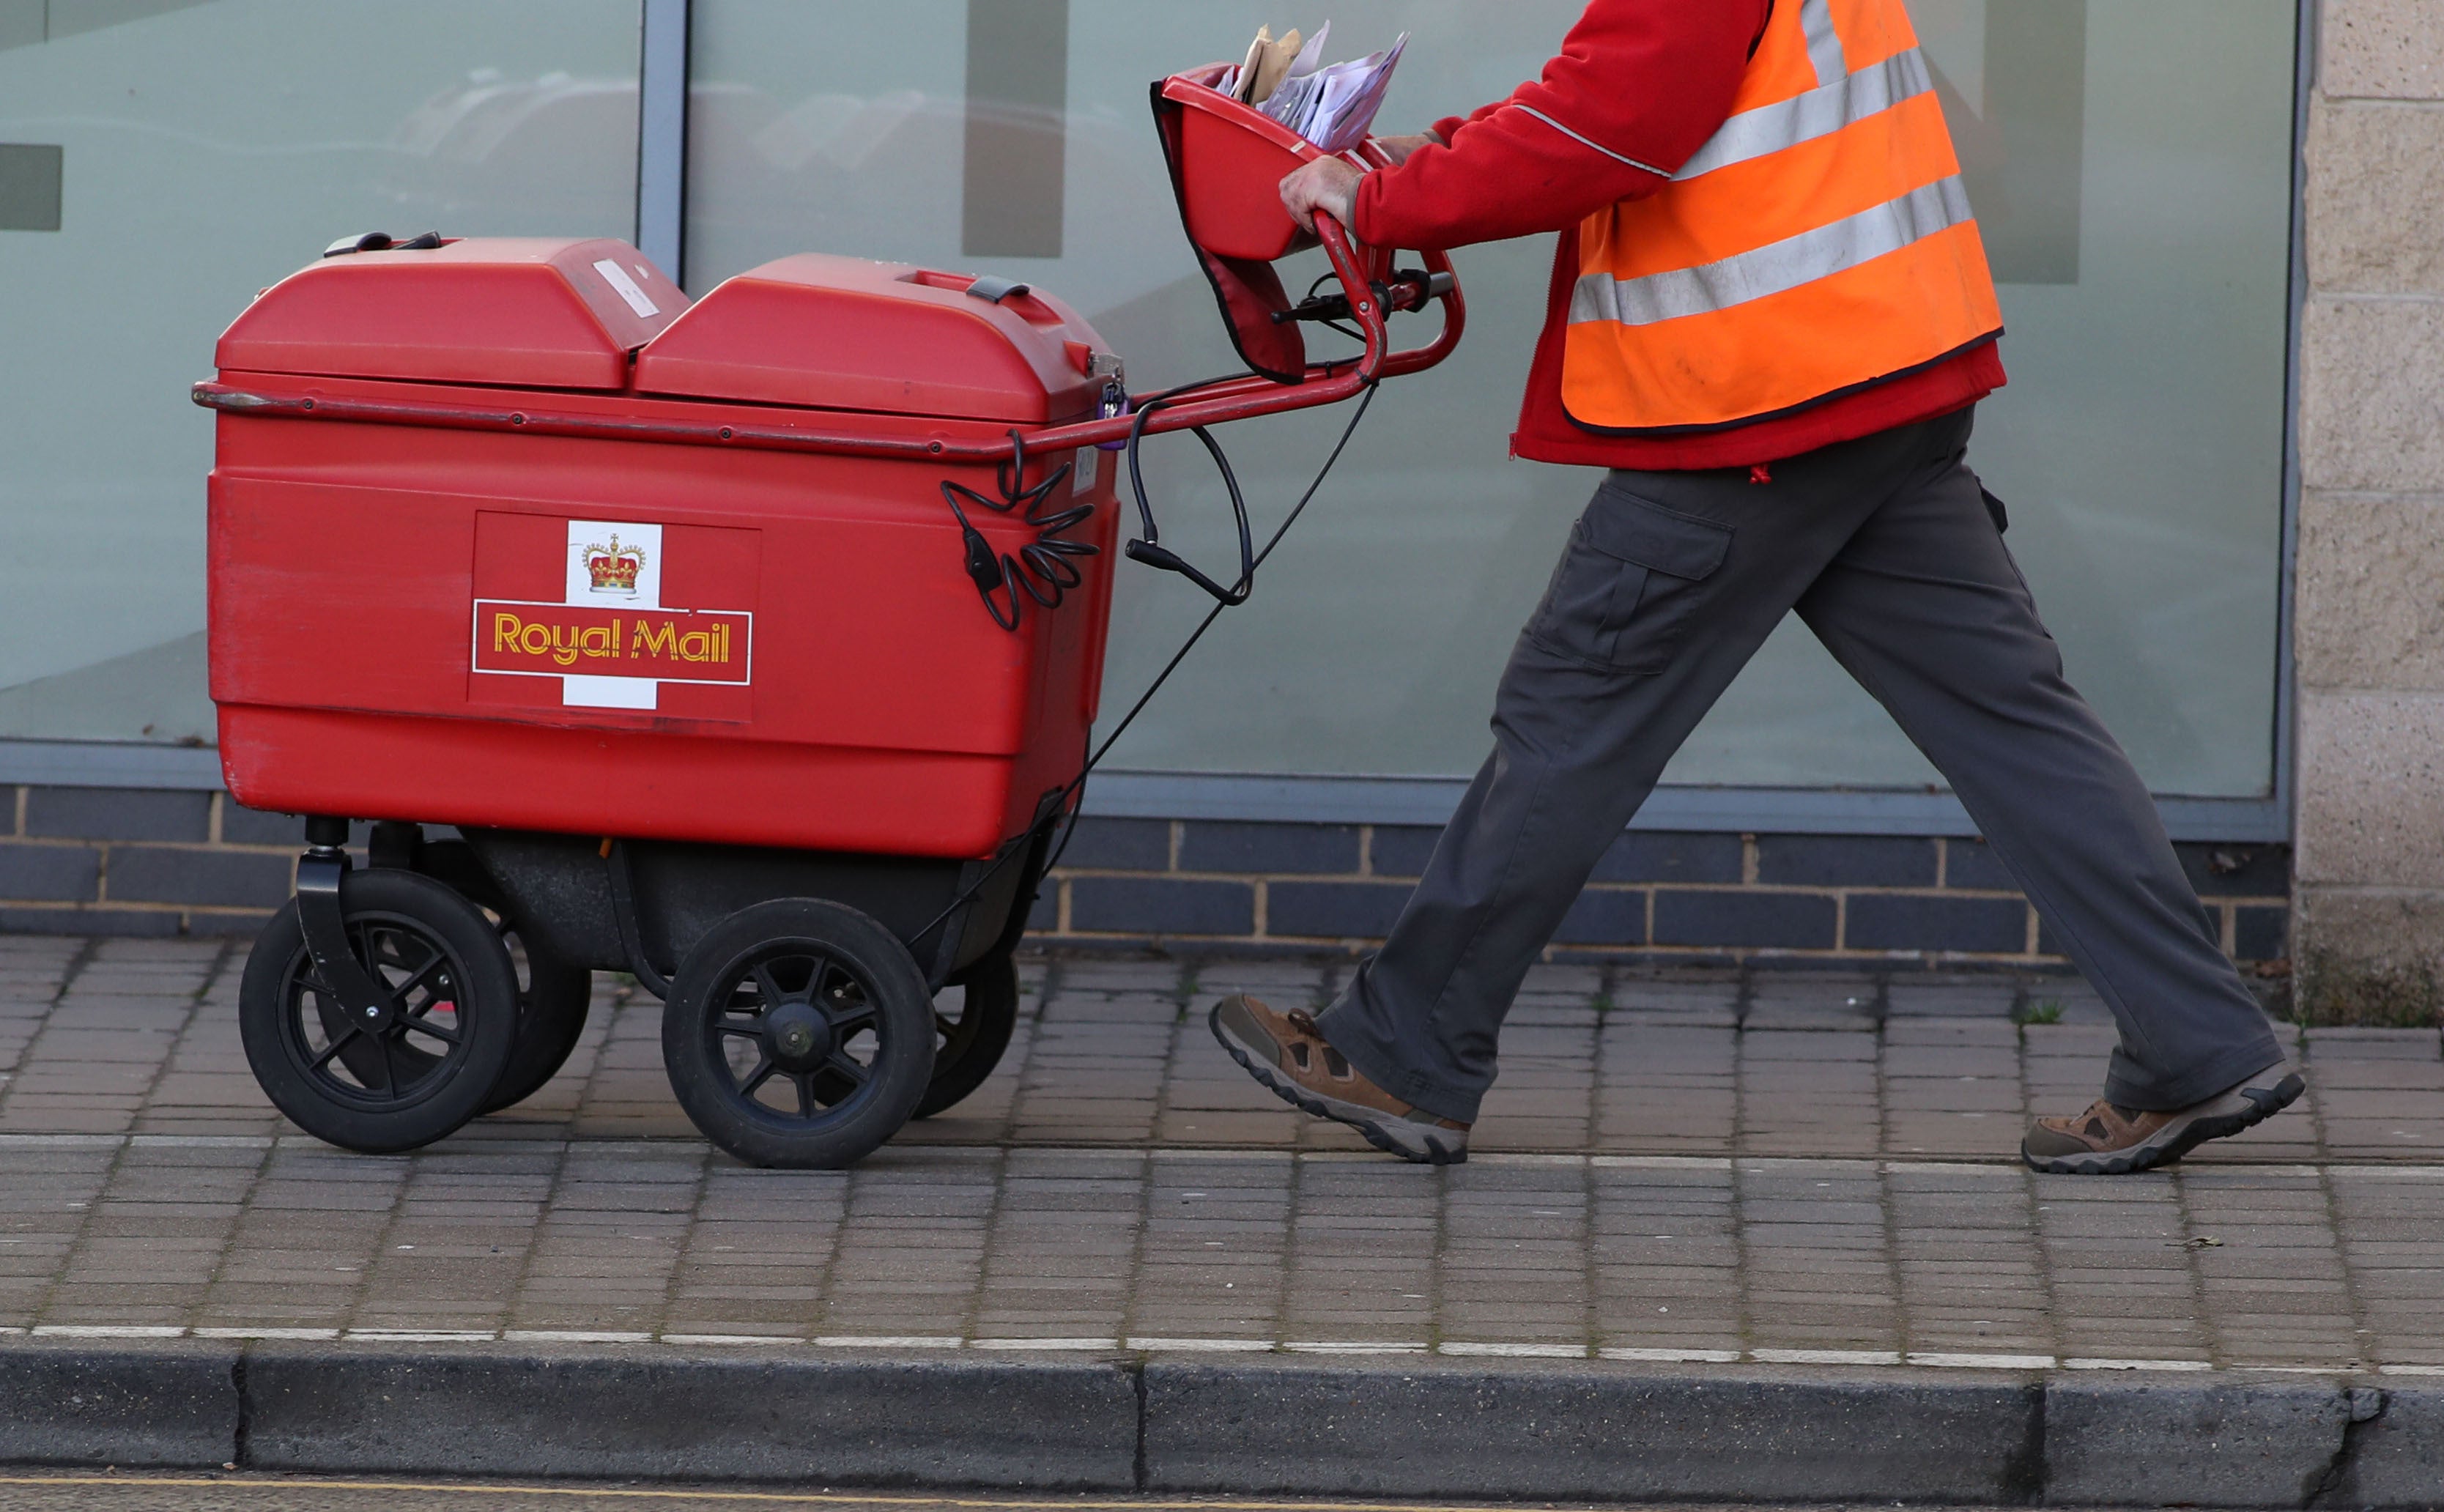 A union’s members have voted in favour of a Royal Mail strike.